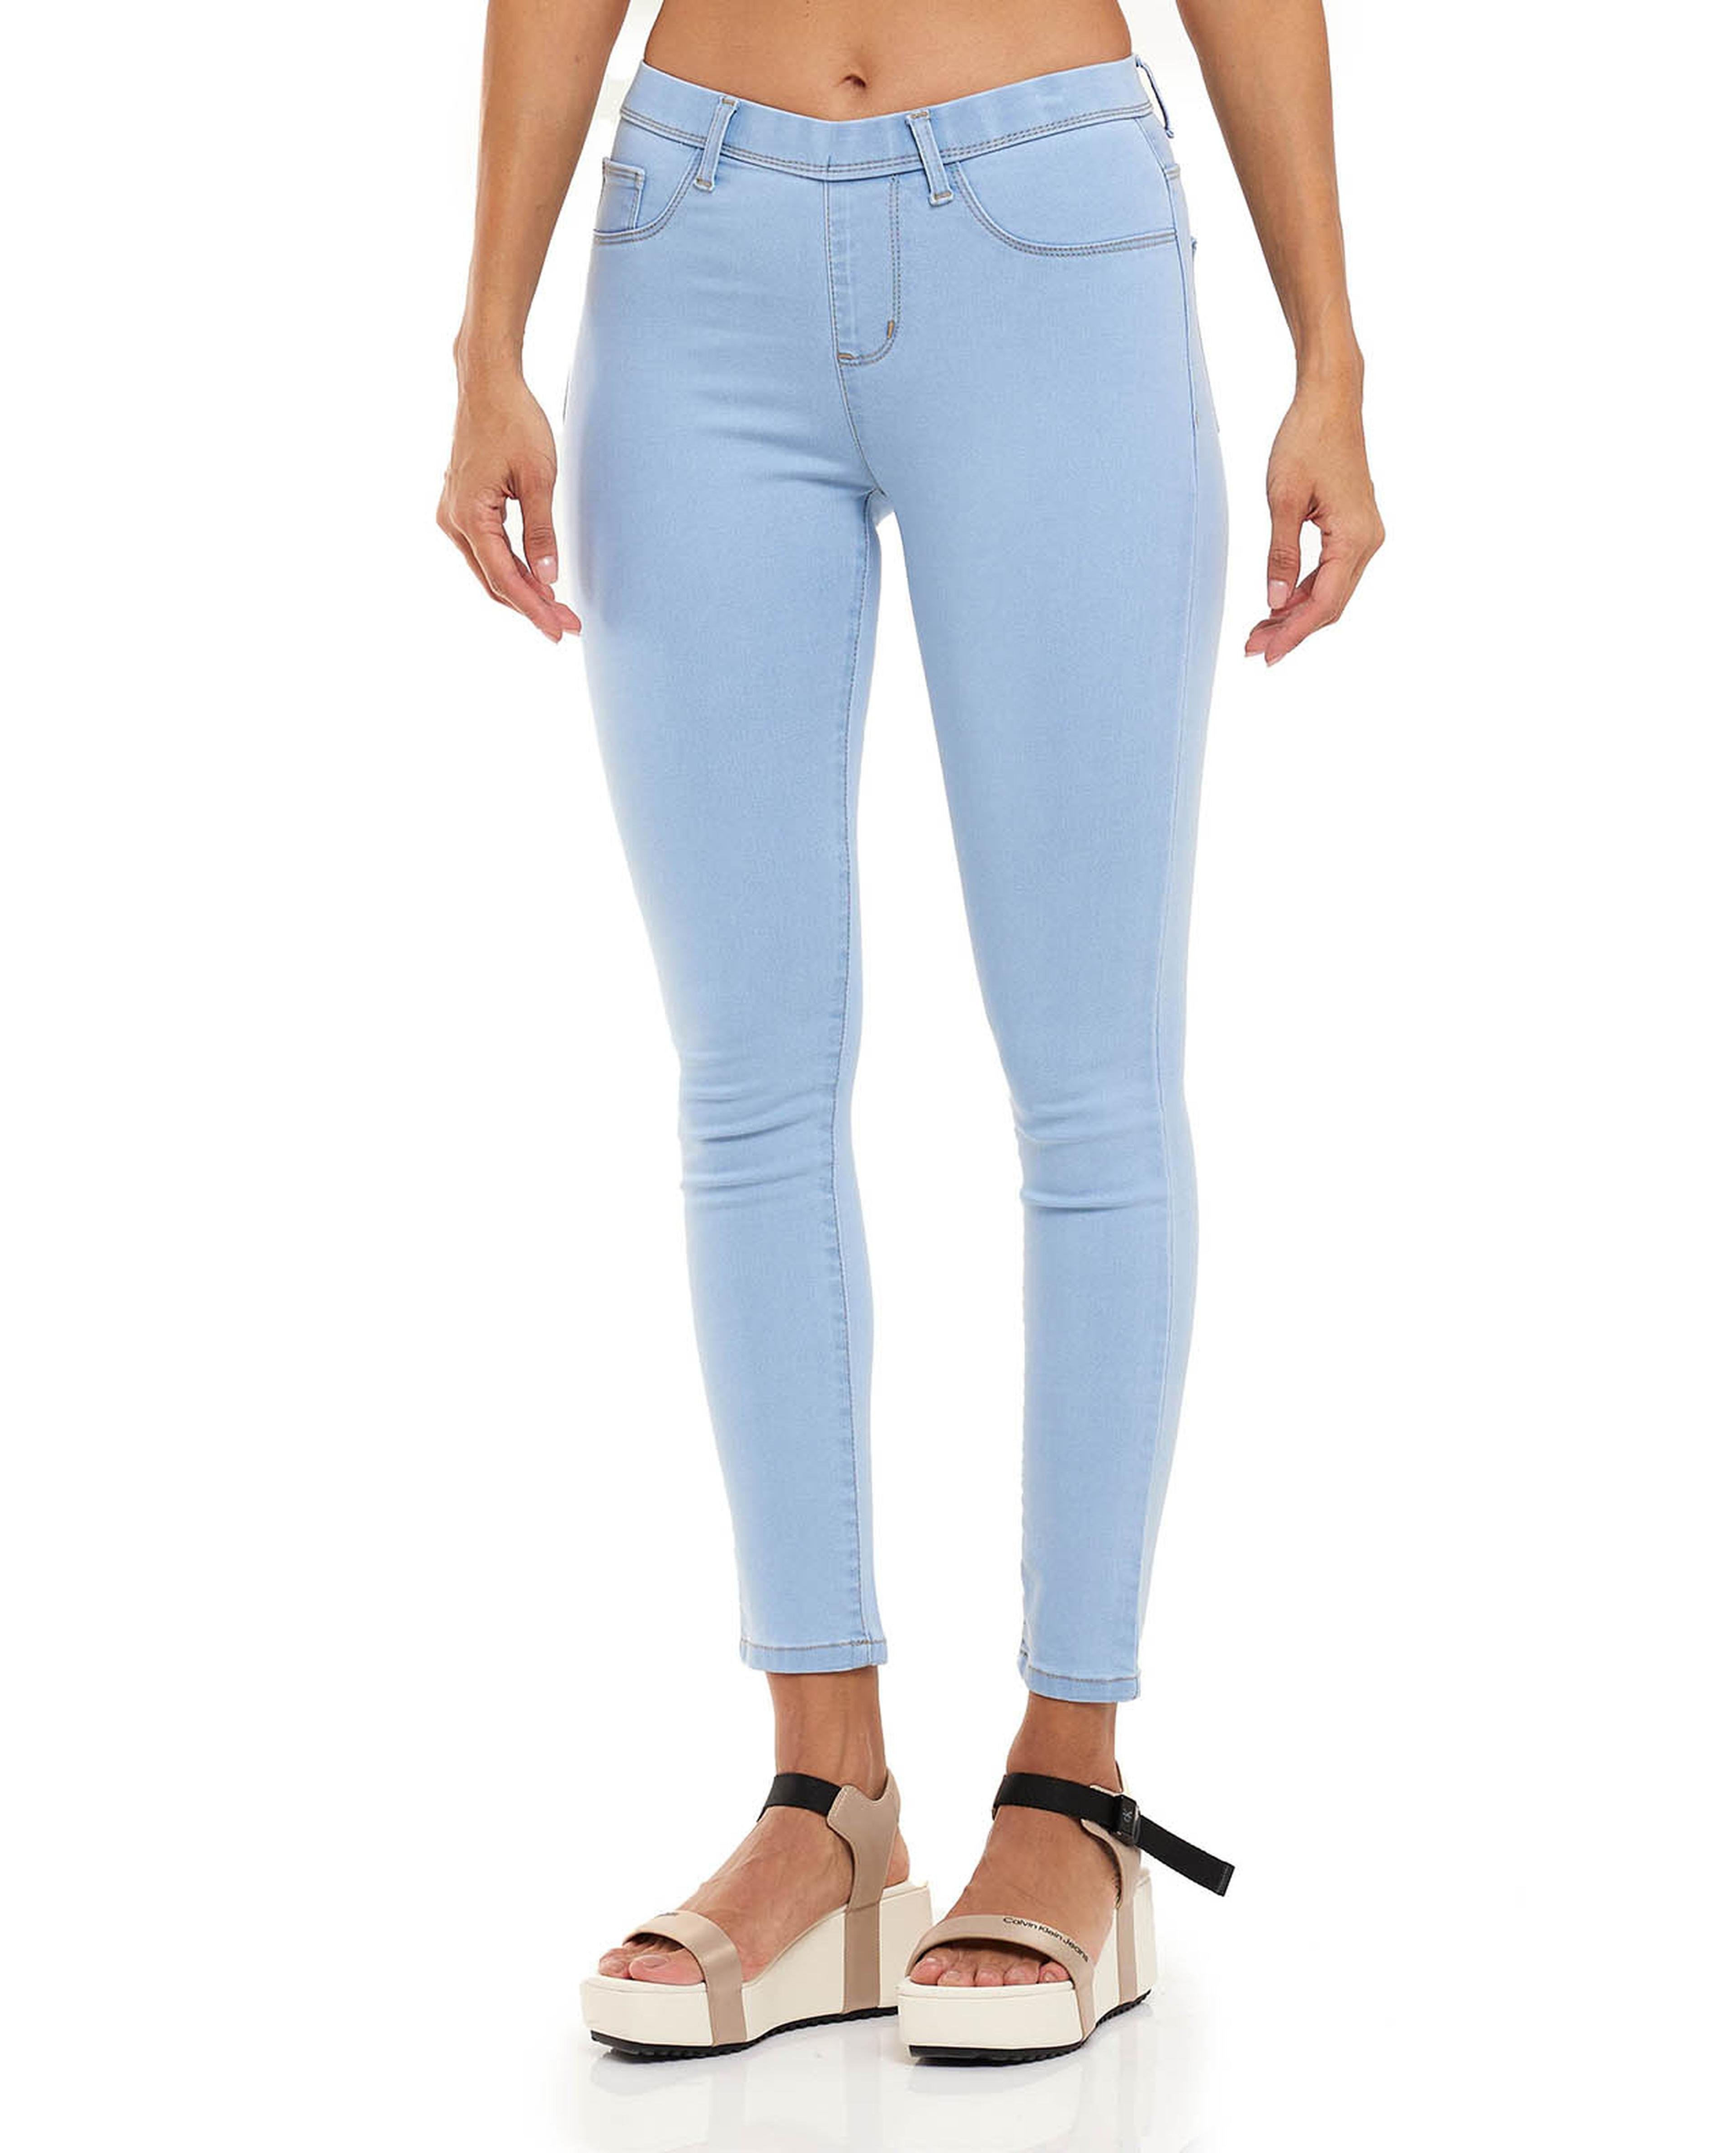 Faded Skinny Fit Jeggings with Elastic Waist